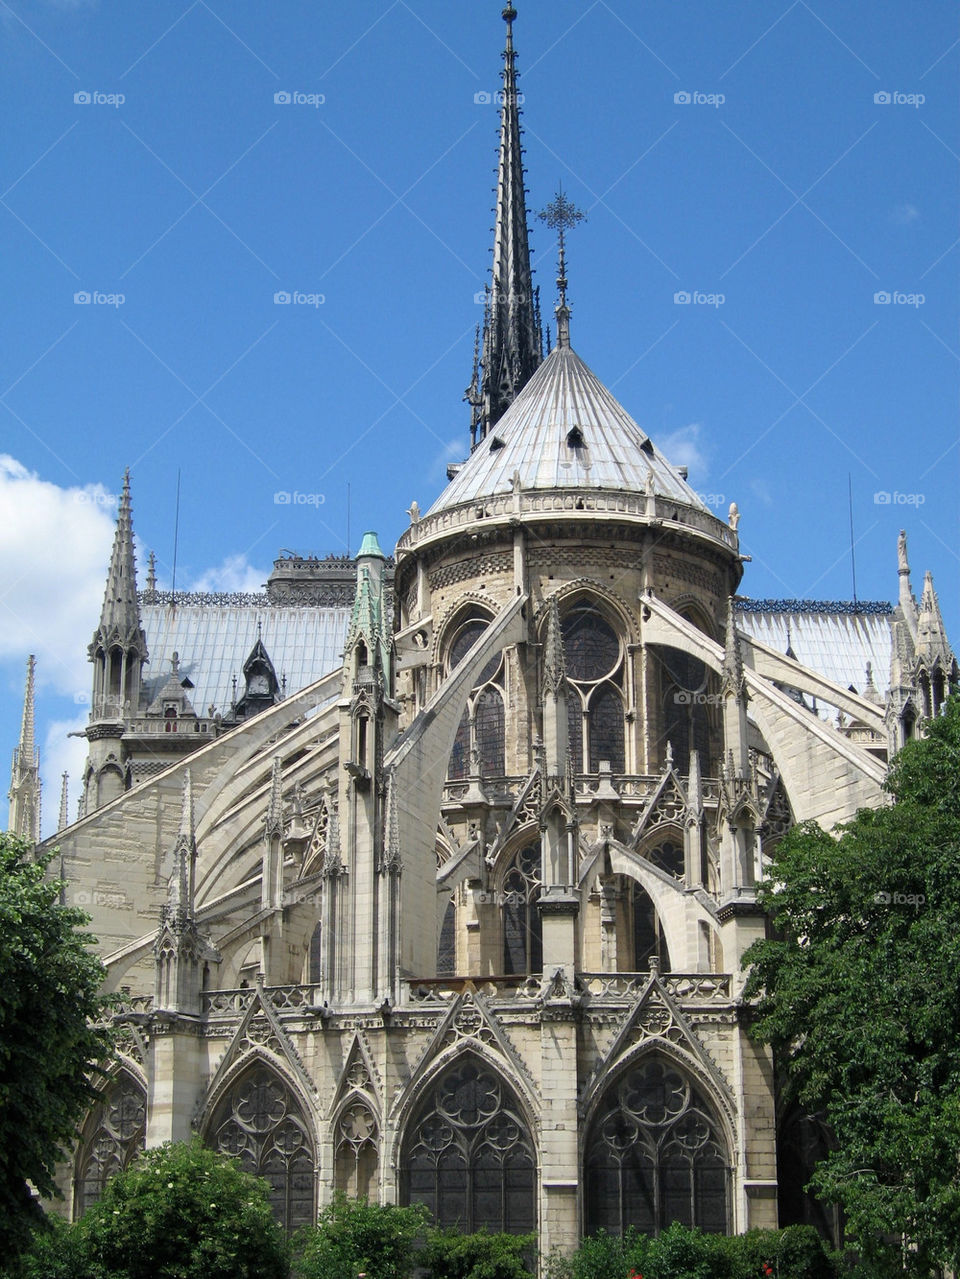 france cathedral paris dame by littlengoc